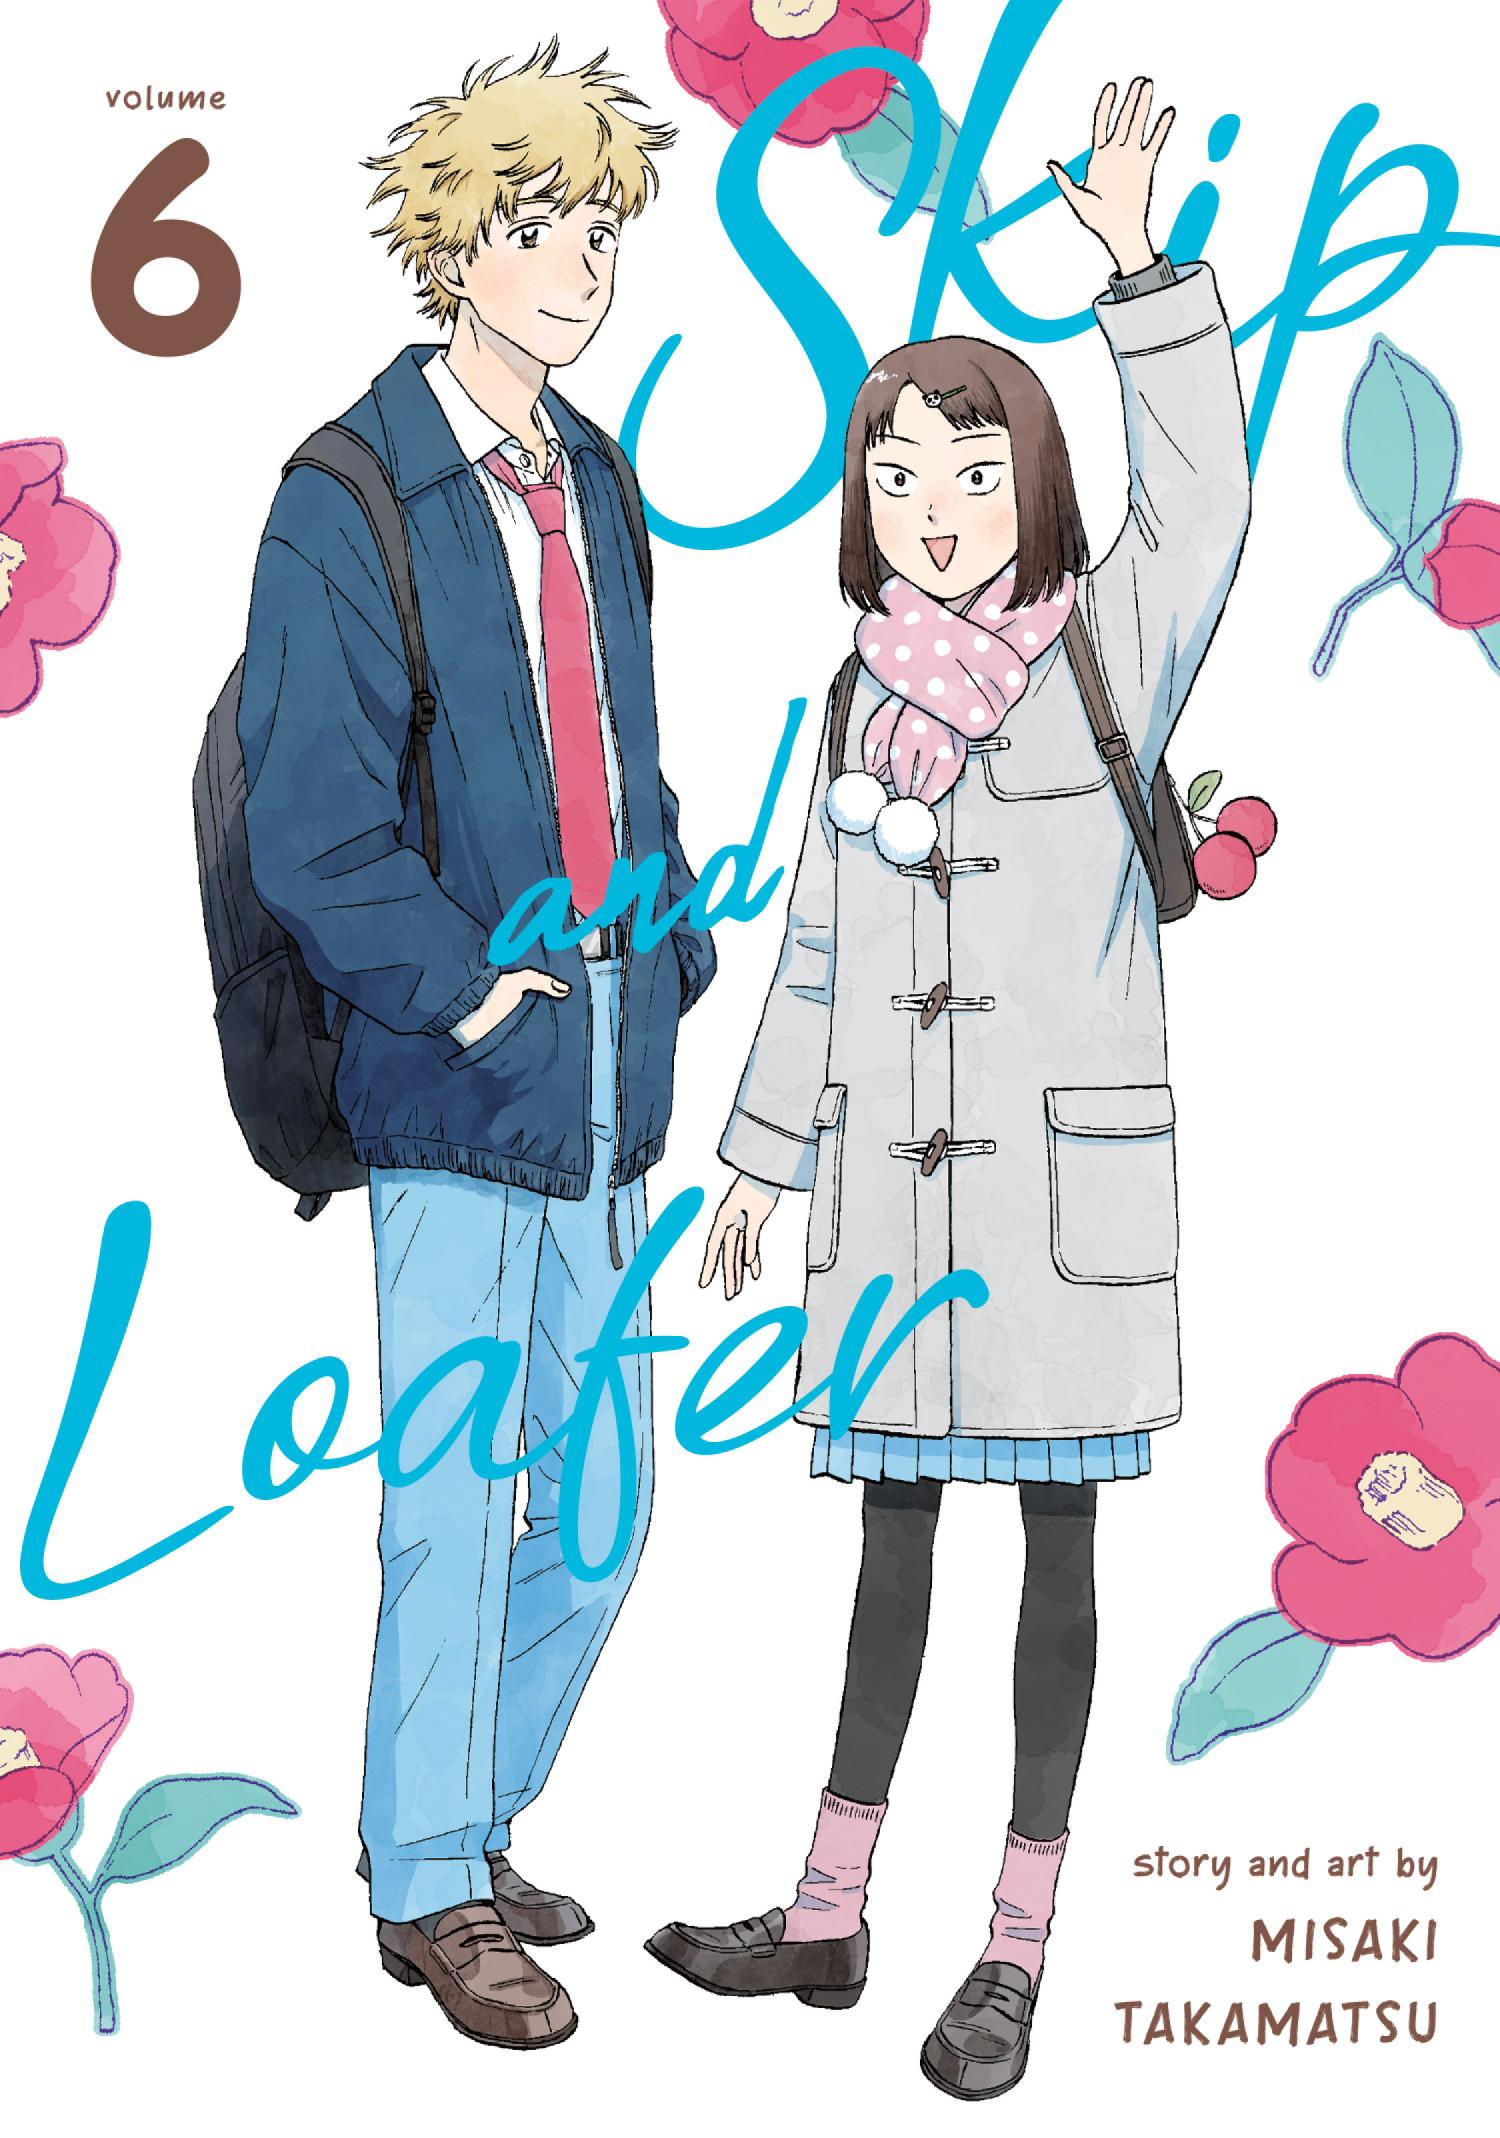 Skip to Loafer Vol.10 Ch.56 Page 6 - Mangago